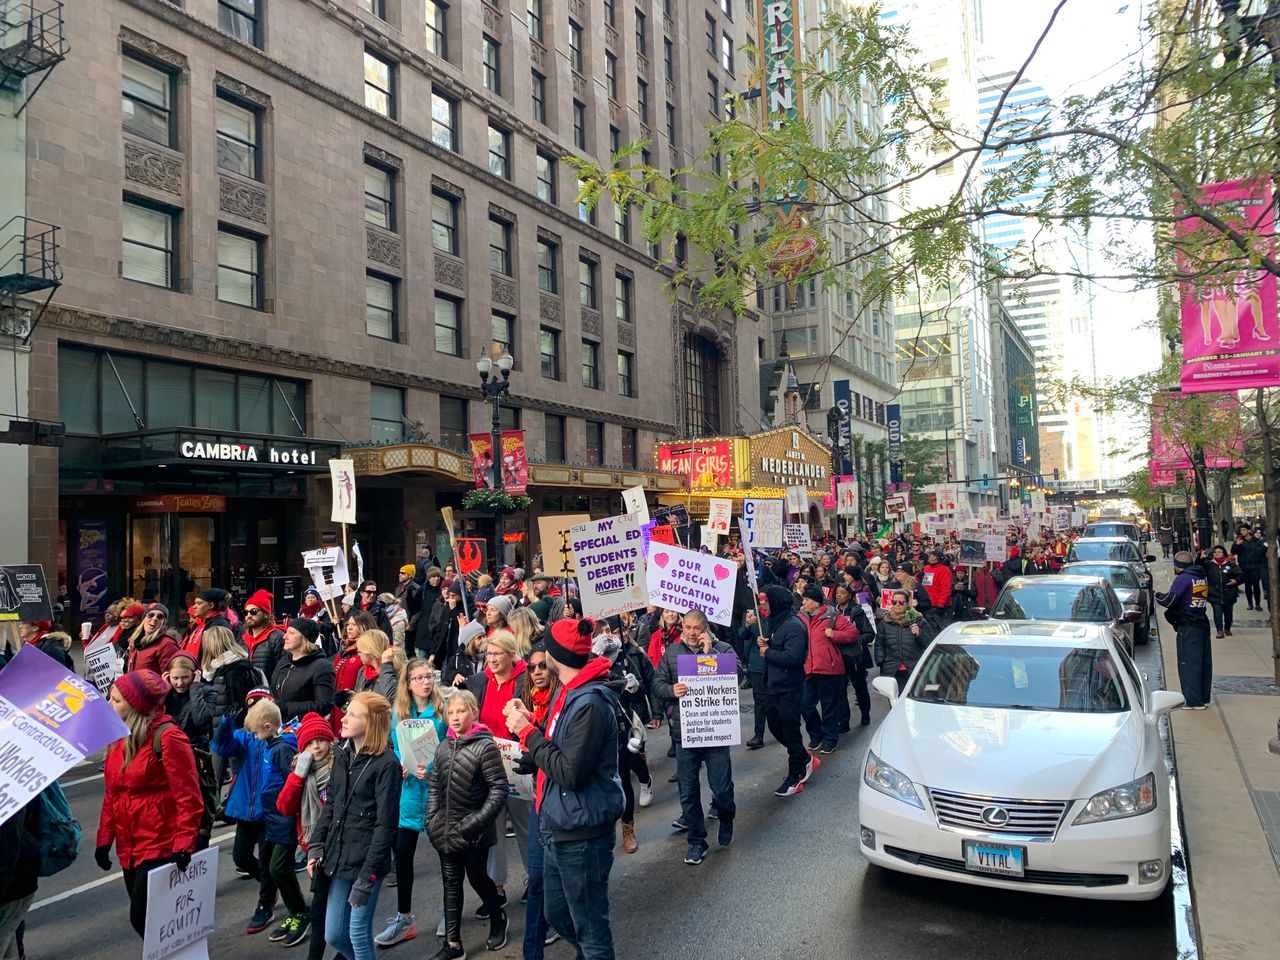 Striking teachers marching in downtown Chicago, USA